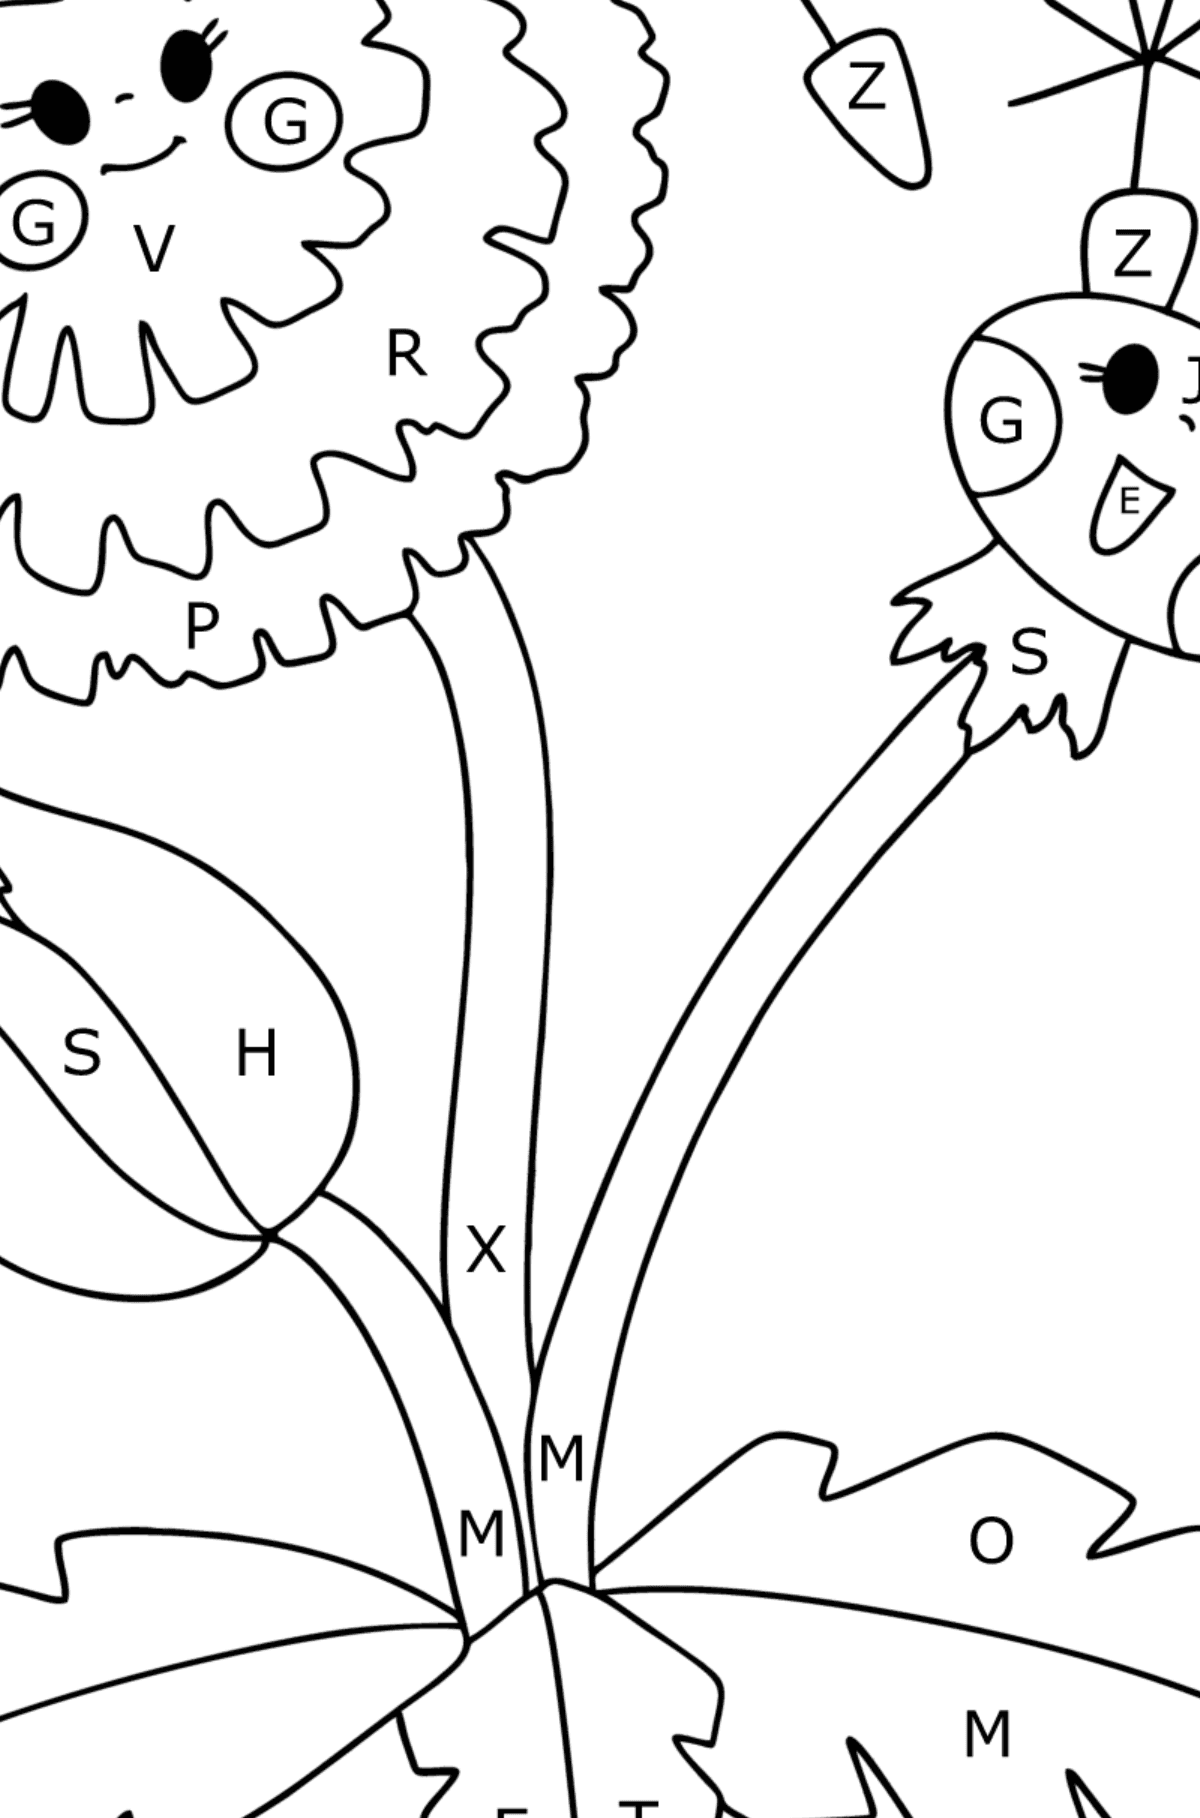 Dandelion with eyes coloring page - Coloring by Letters for Kids